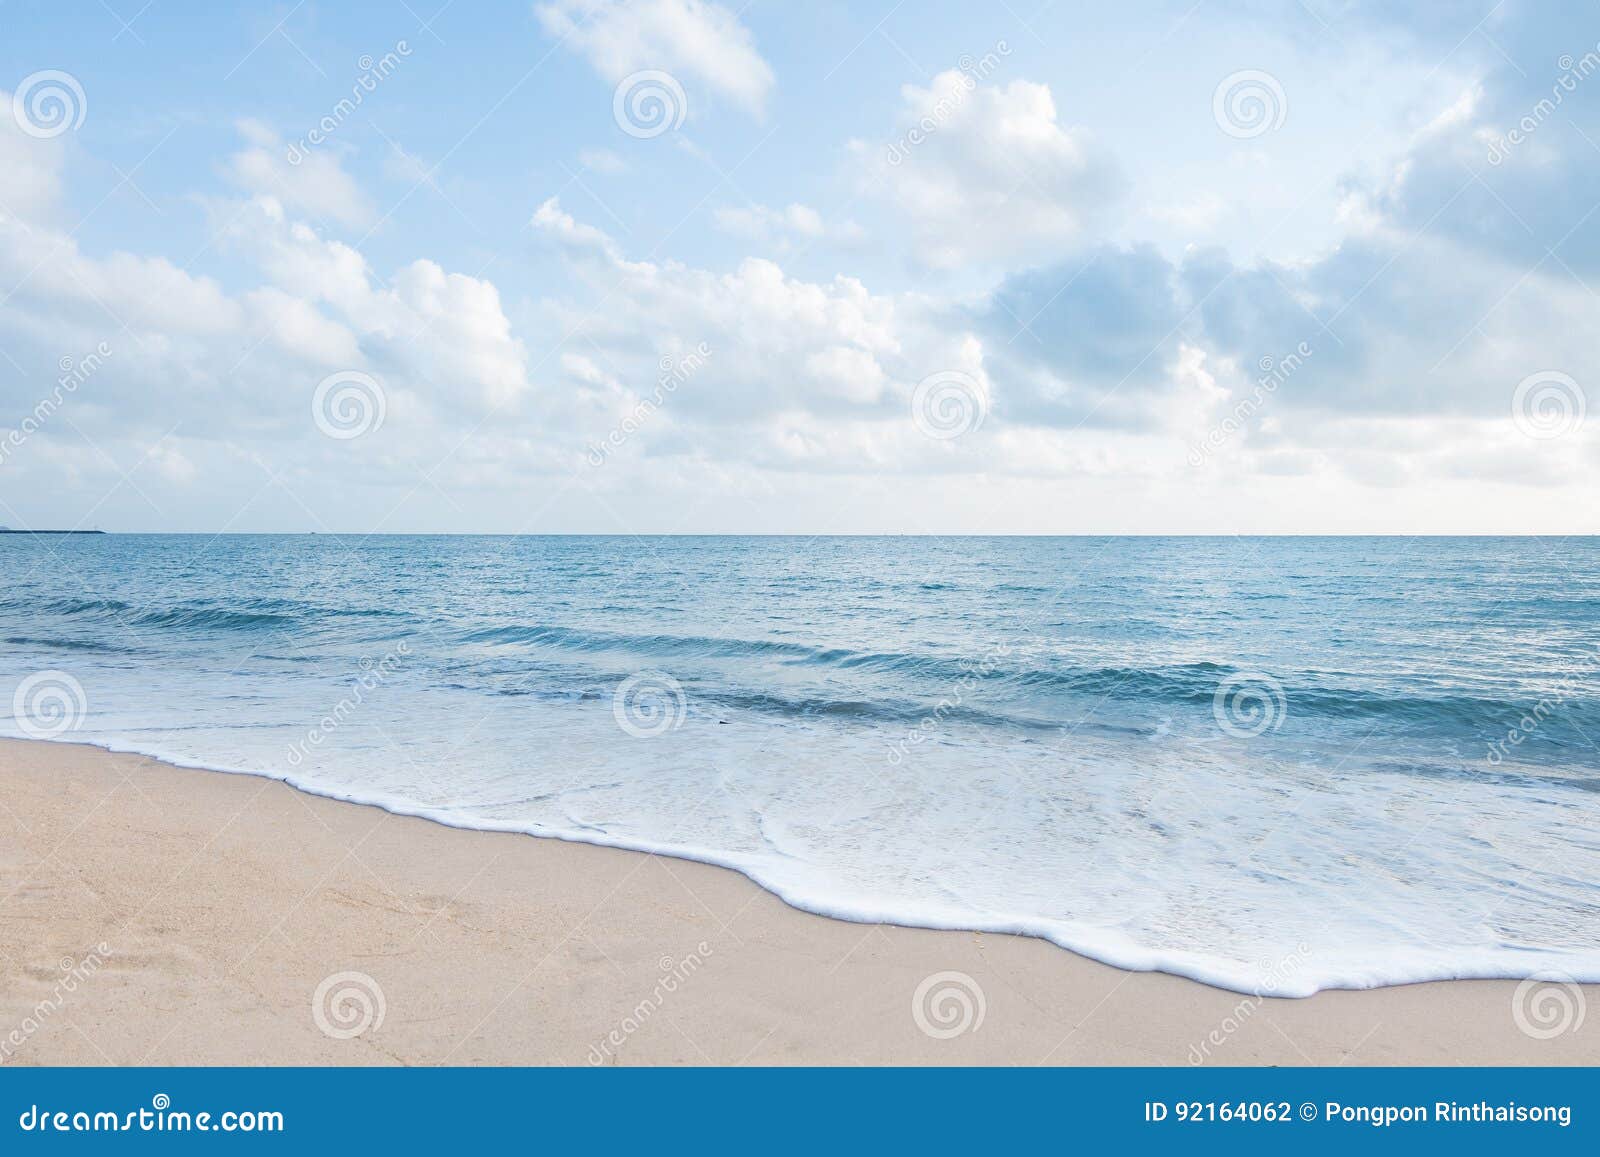 beautiful white sand beach and ocean waves with clear blue sky